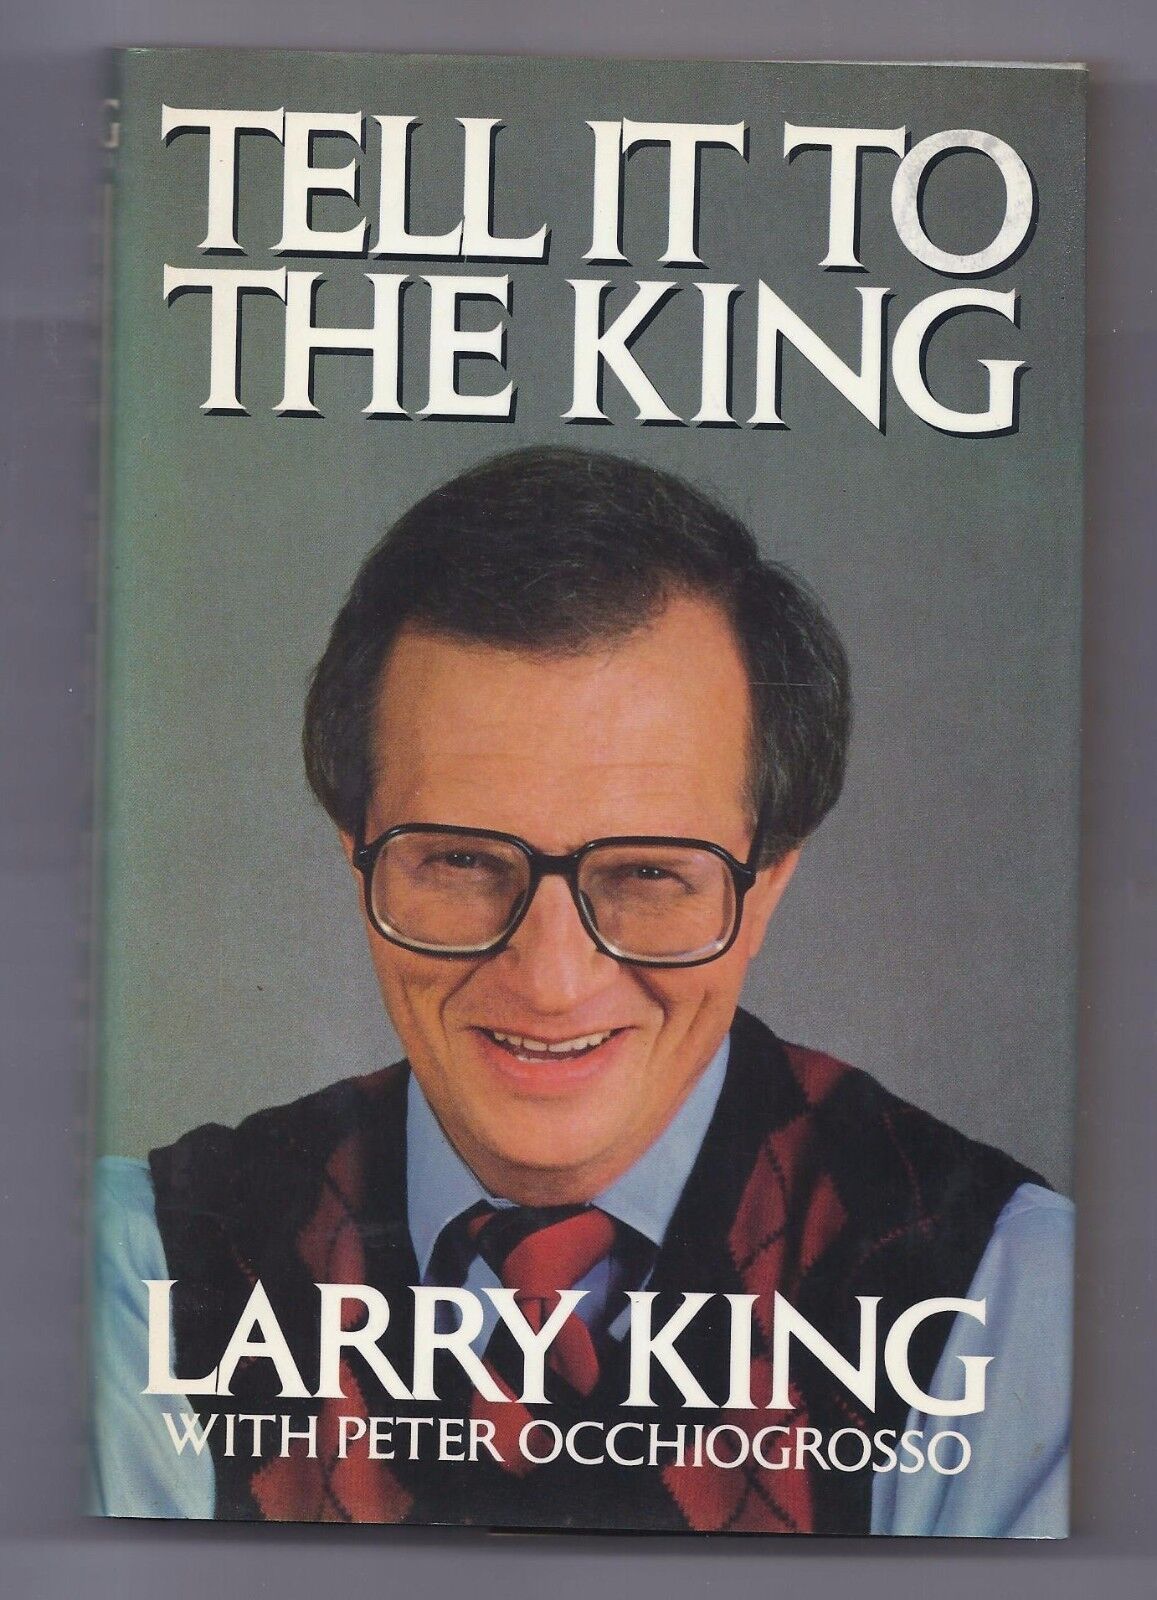 Primary image for Tell It to the King by Peter Occhiogrosso and Larry King (1988, Hardcover)